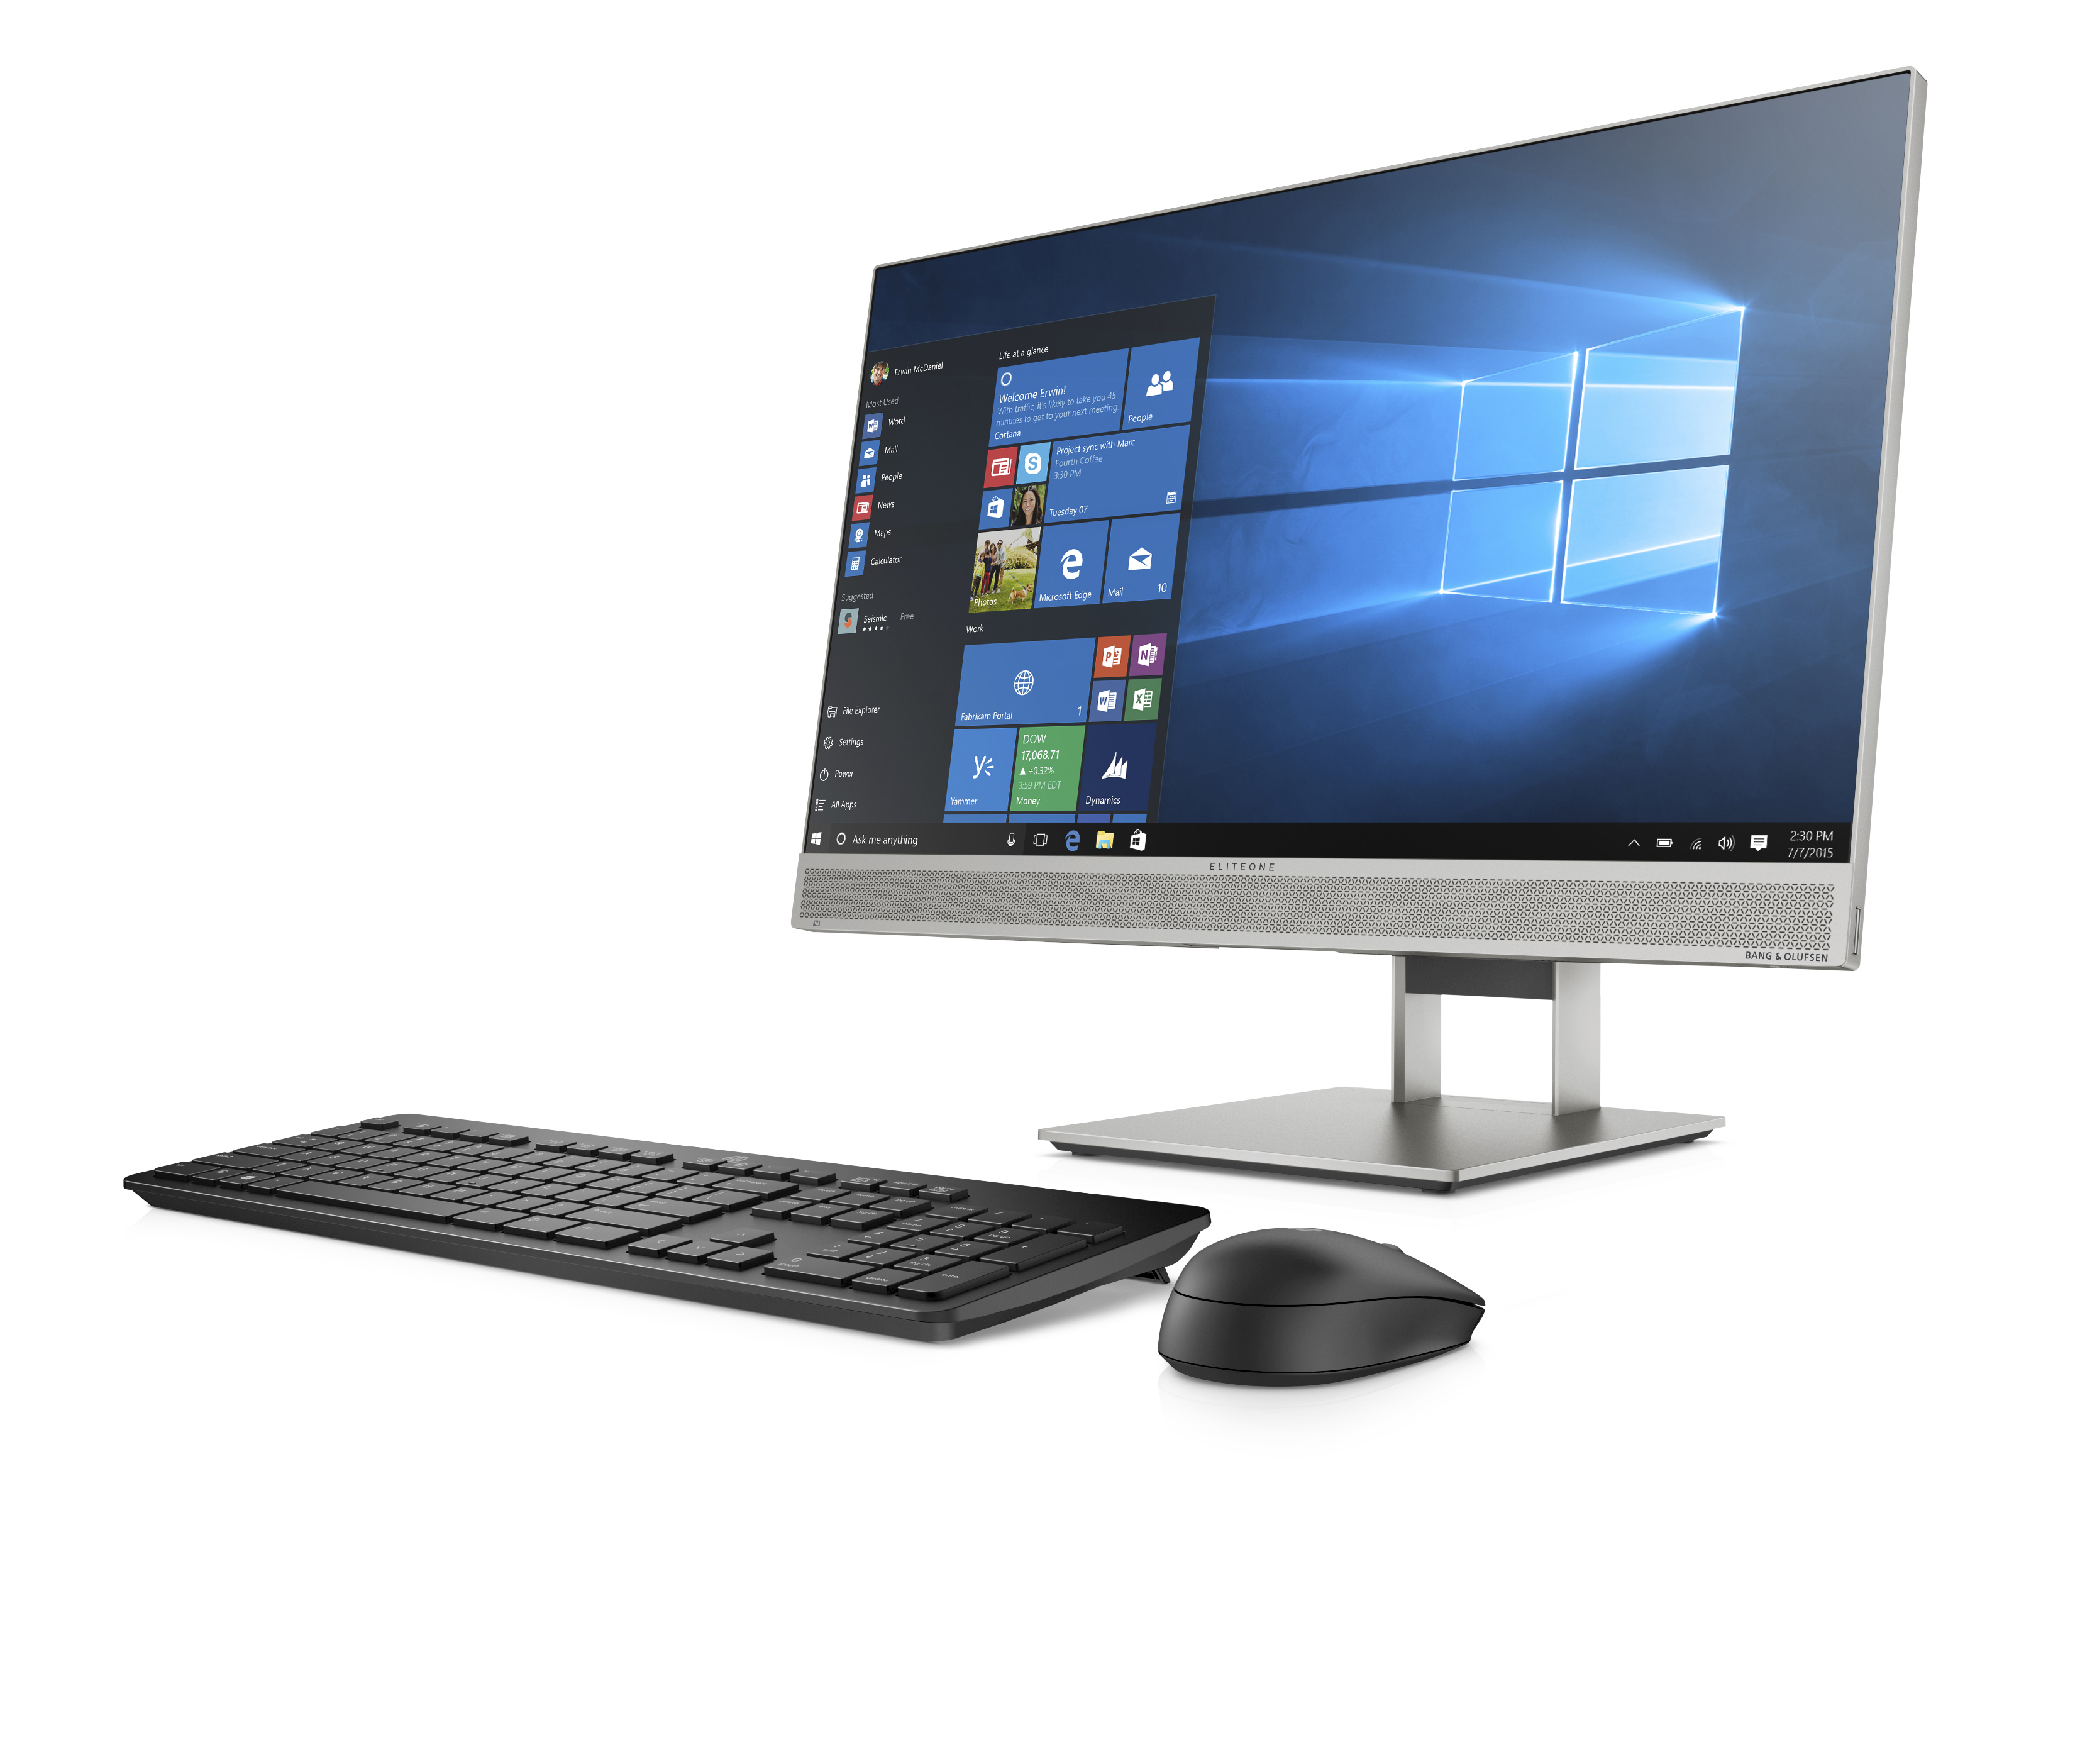 hp launches new monitors and all in one ces 2019 eliteone 800 g5 aio front left